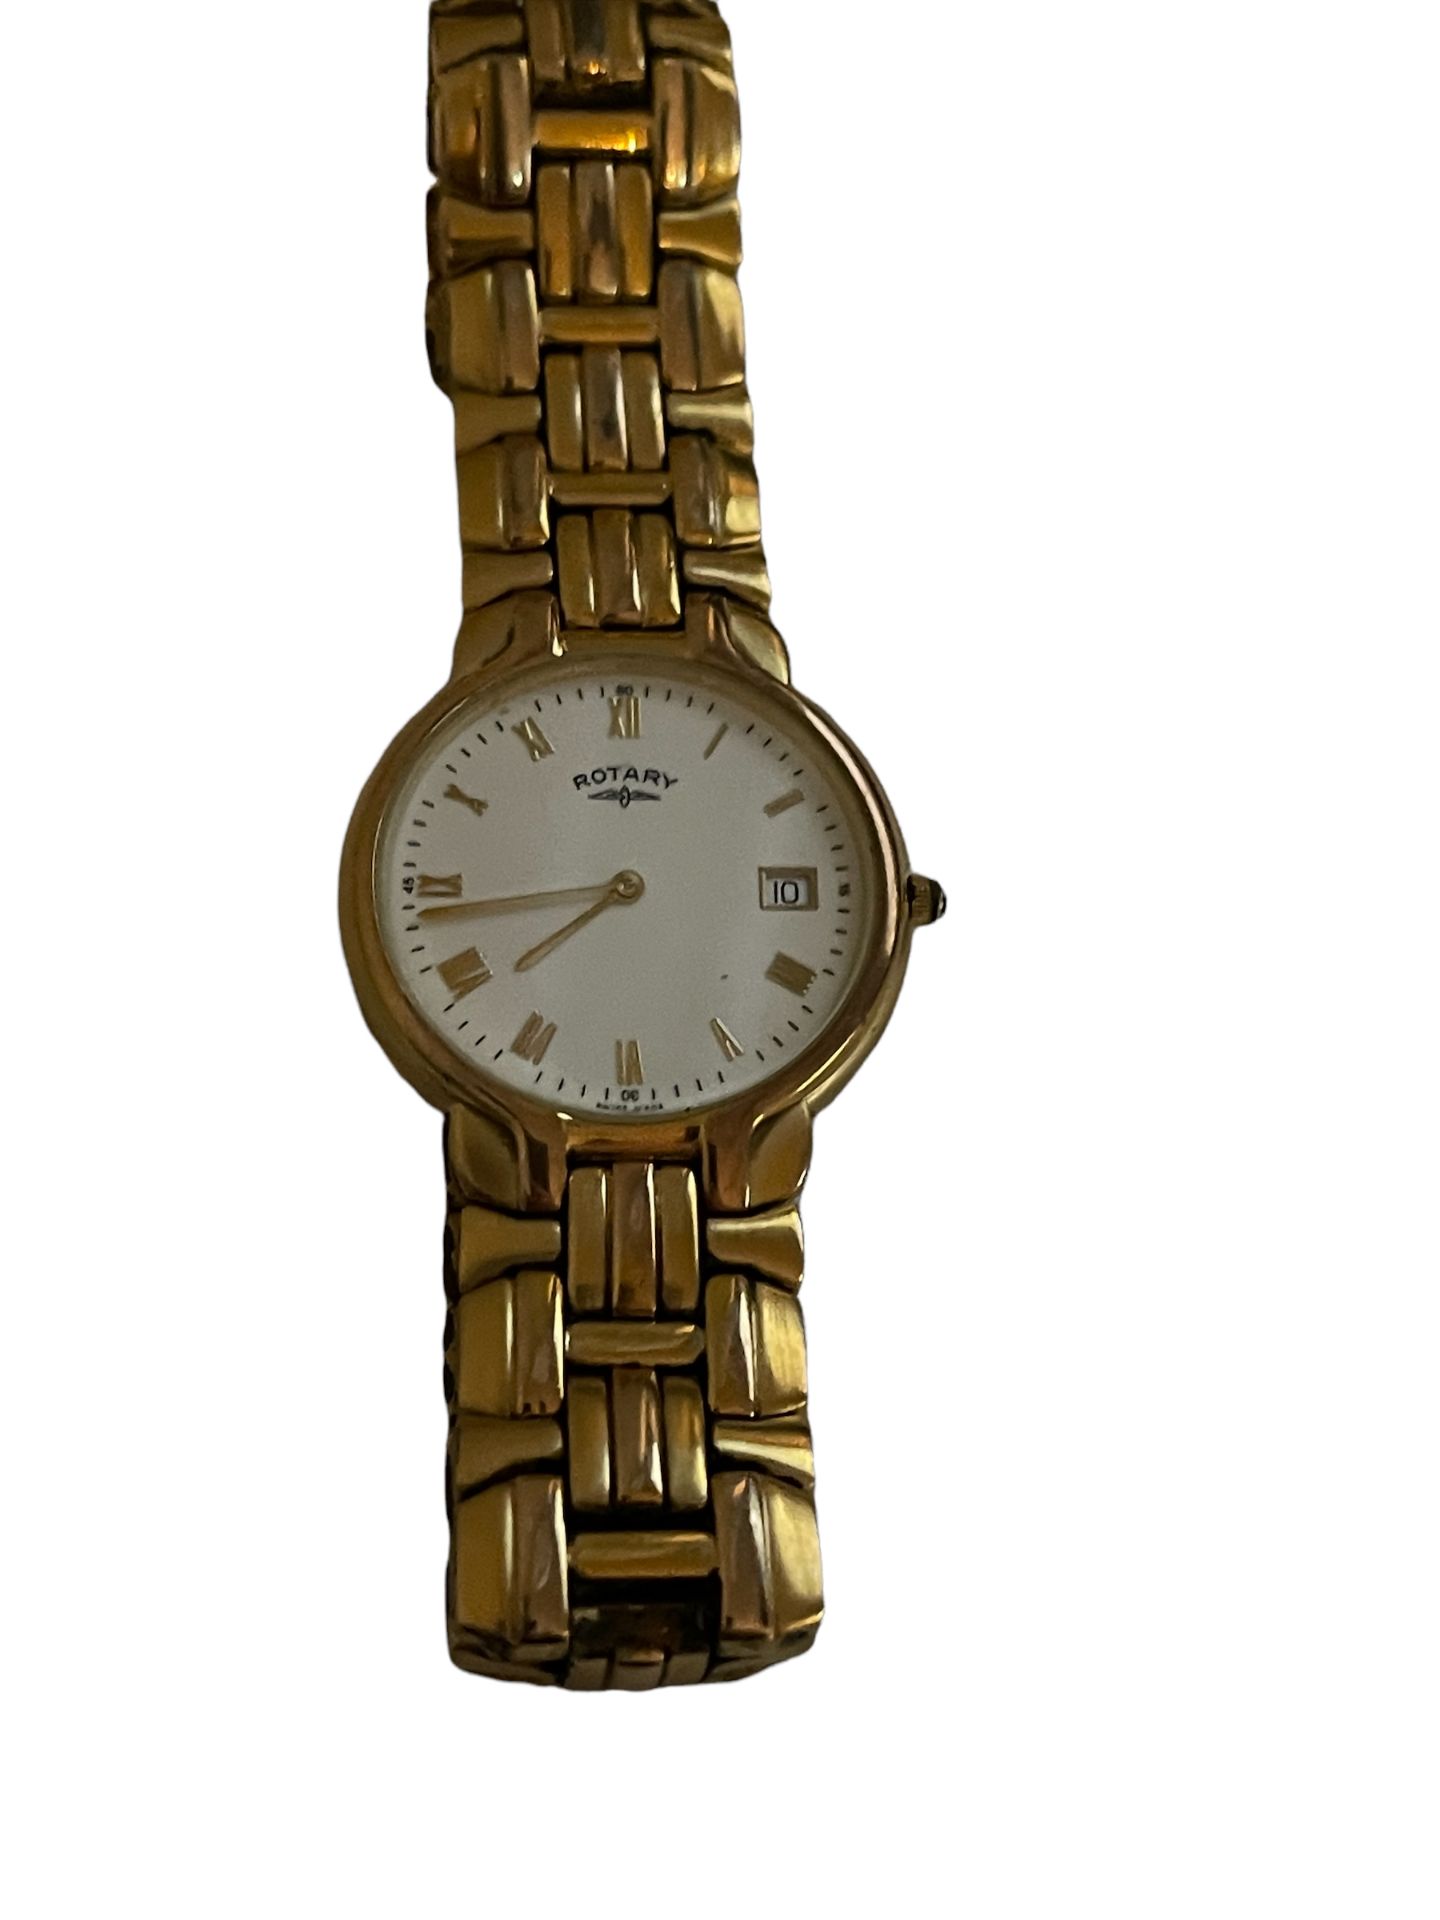 Mens Rotary Gold Plated Watch - Return Stock from our Private Jet Charter - Image 9 of 14